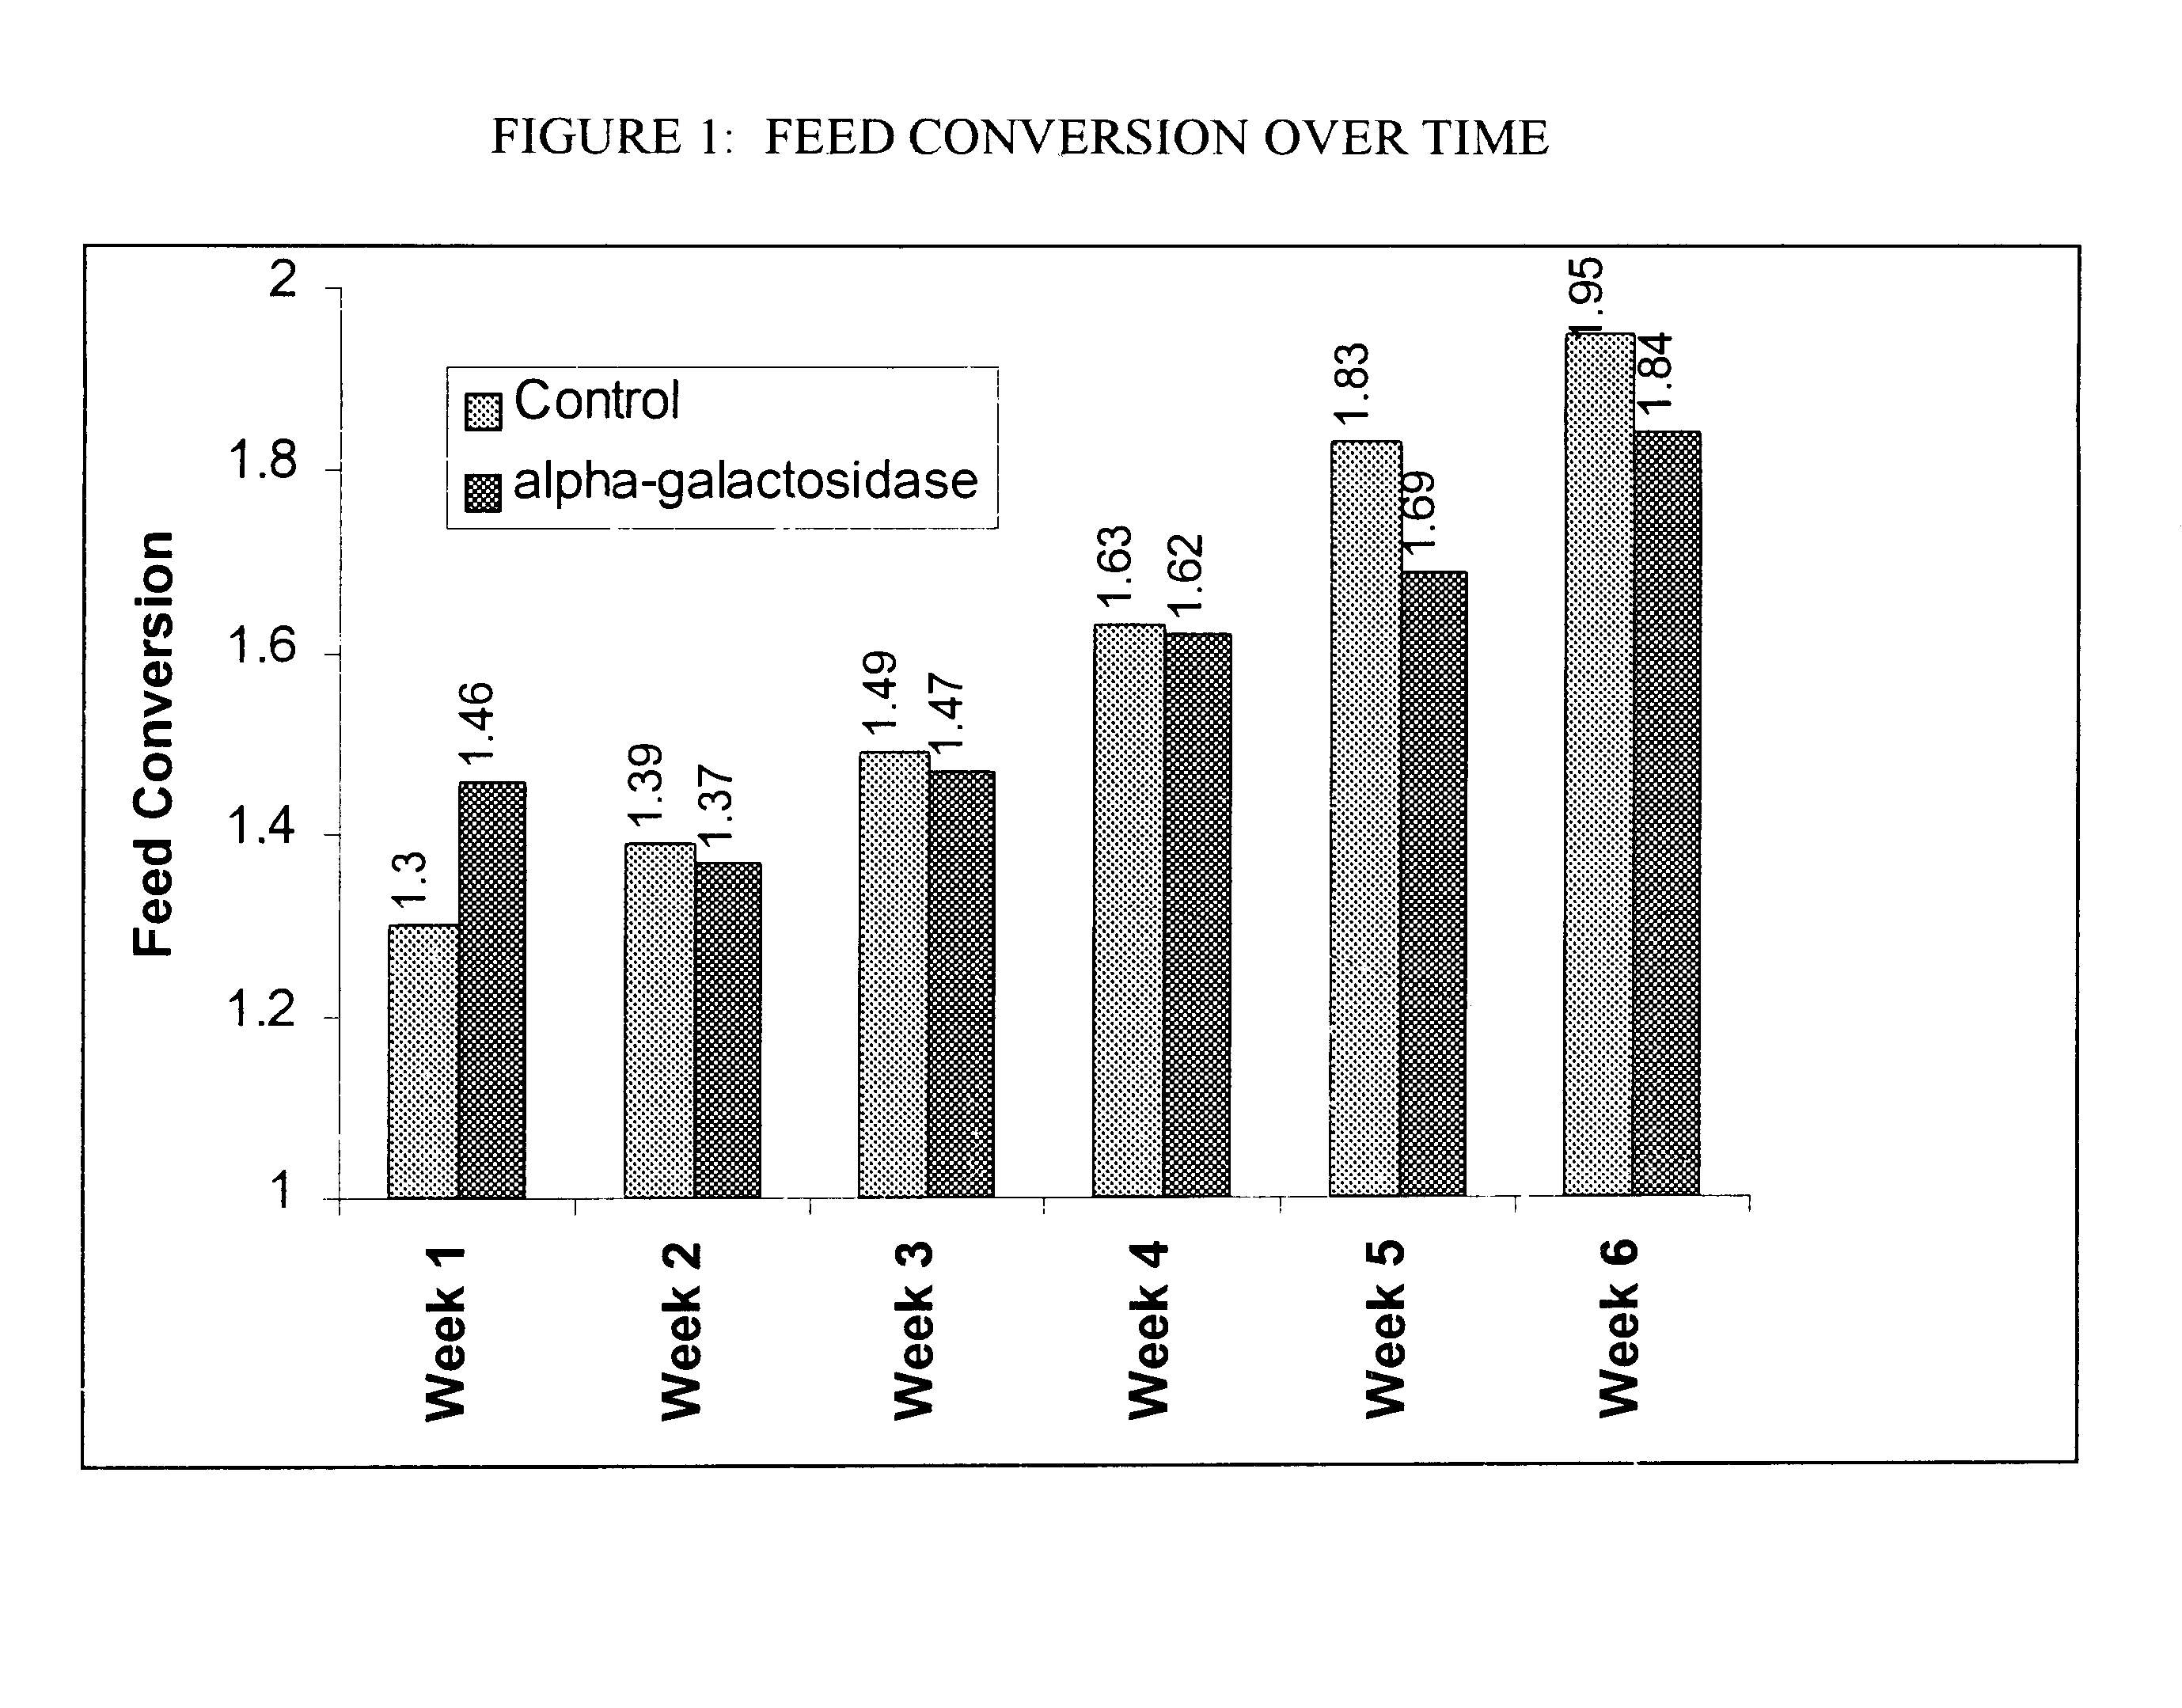 Method for increasing breast meat yields in poultry